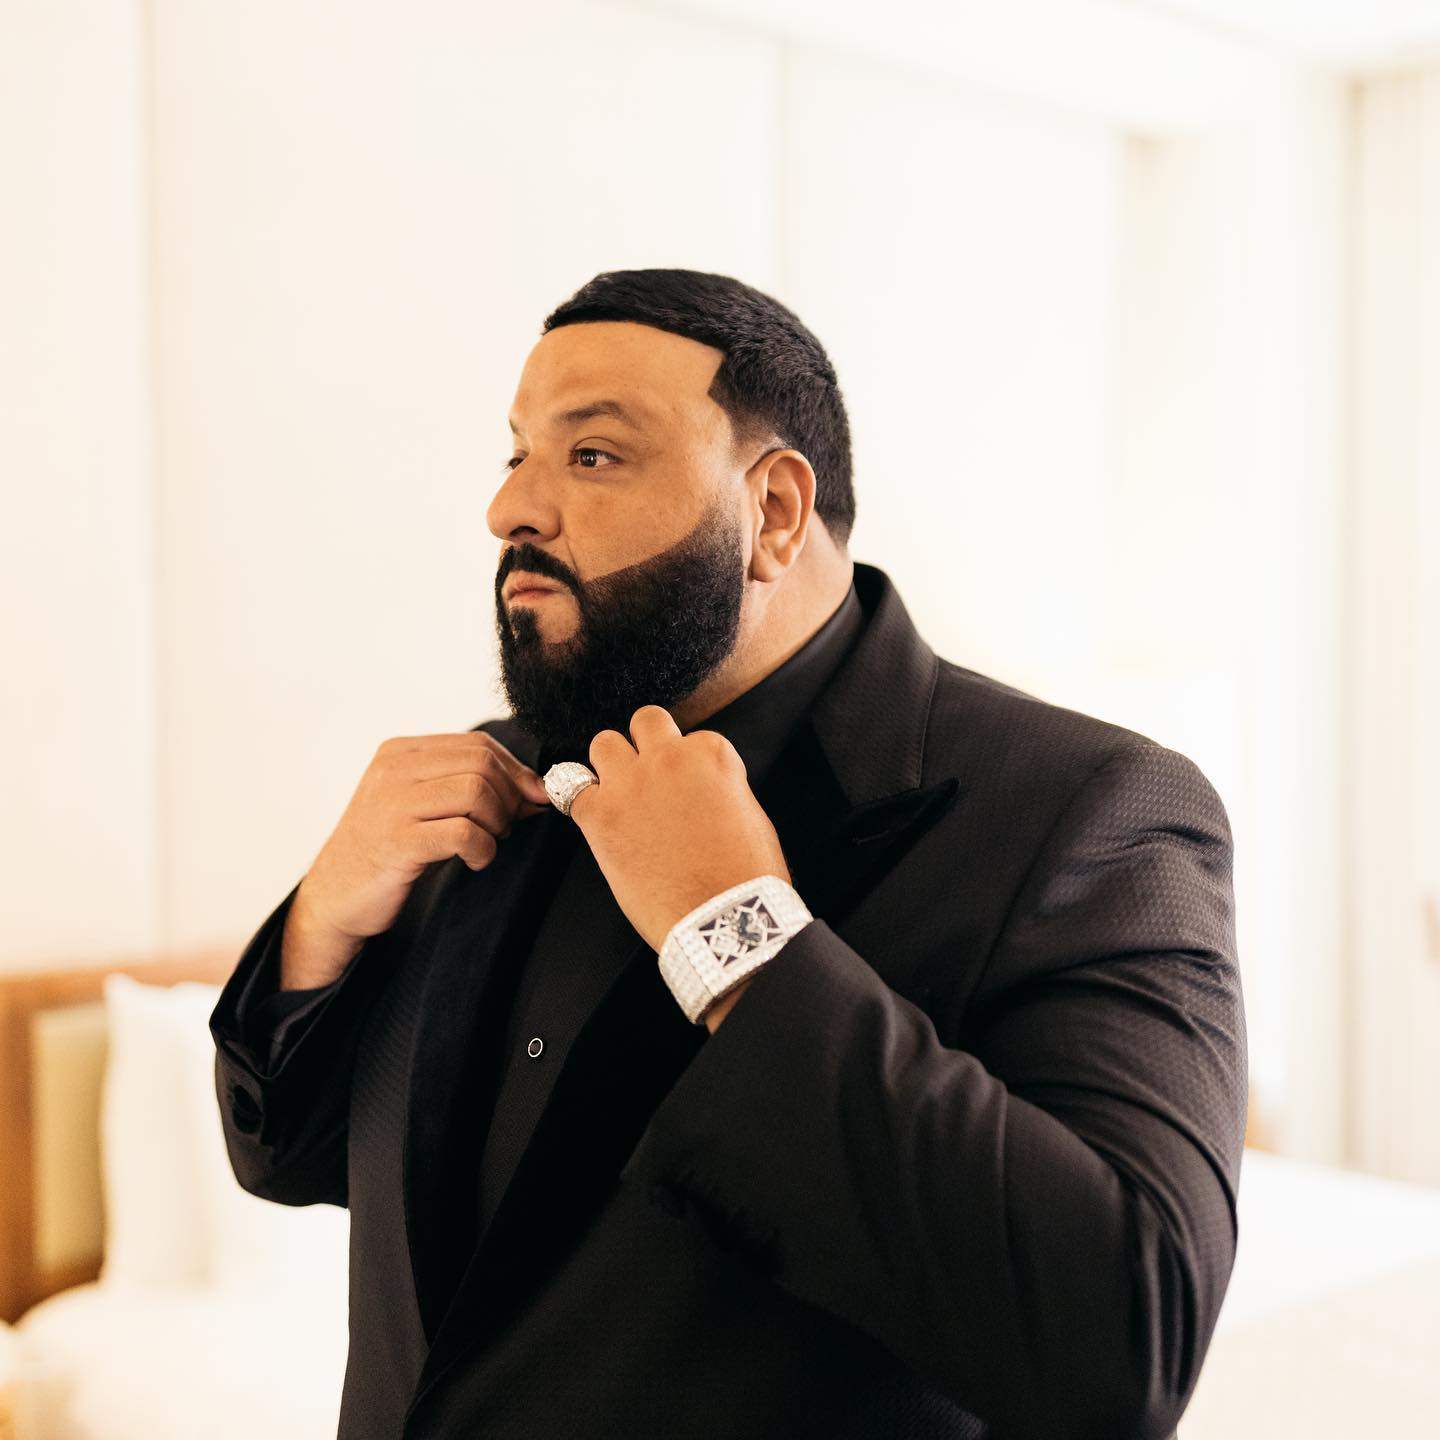 DJ Khaled getting ready for the Oscars: the DJ and producer has one of the most blinged out watch collections in the world. Photo: @djkhaled/Instagram